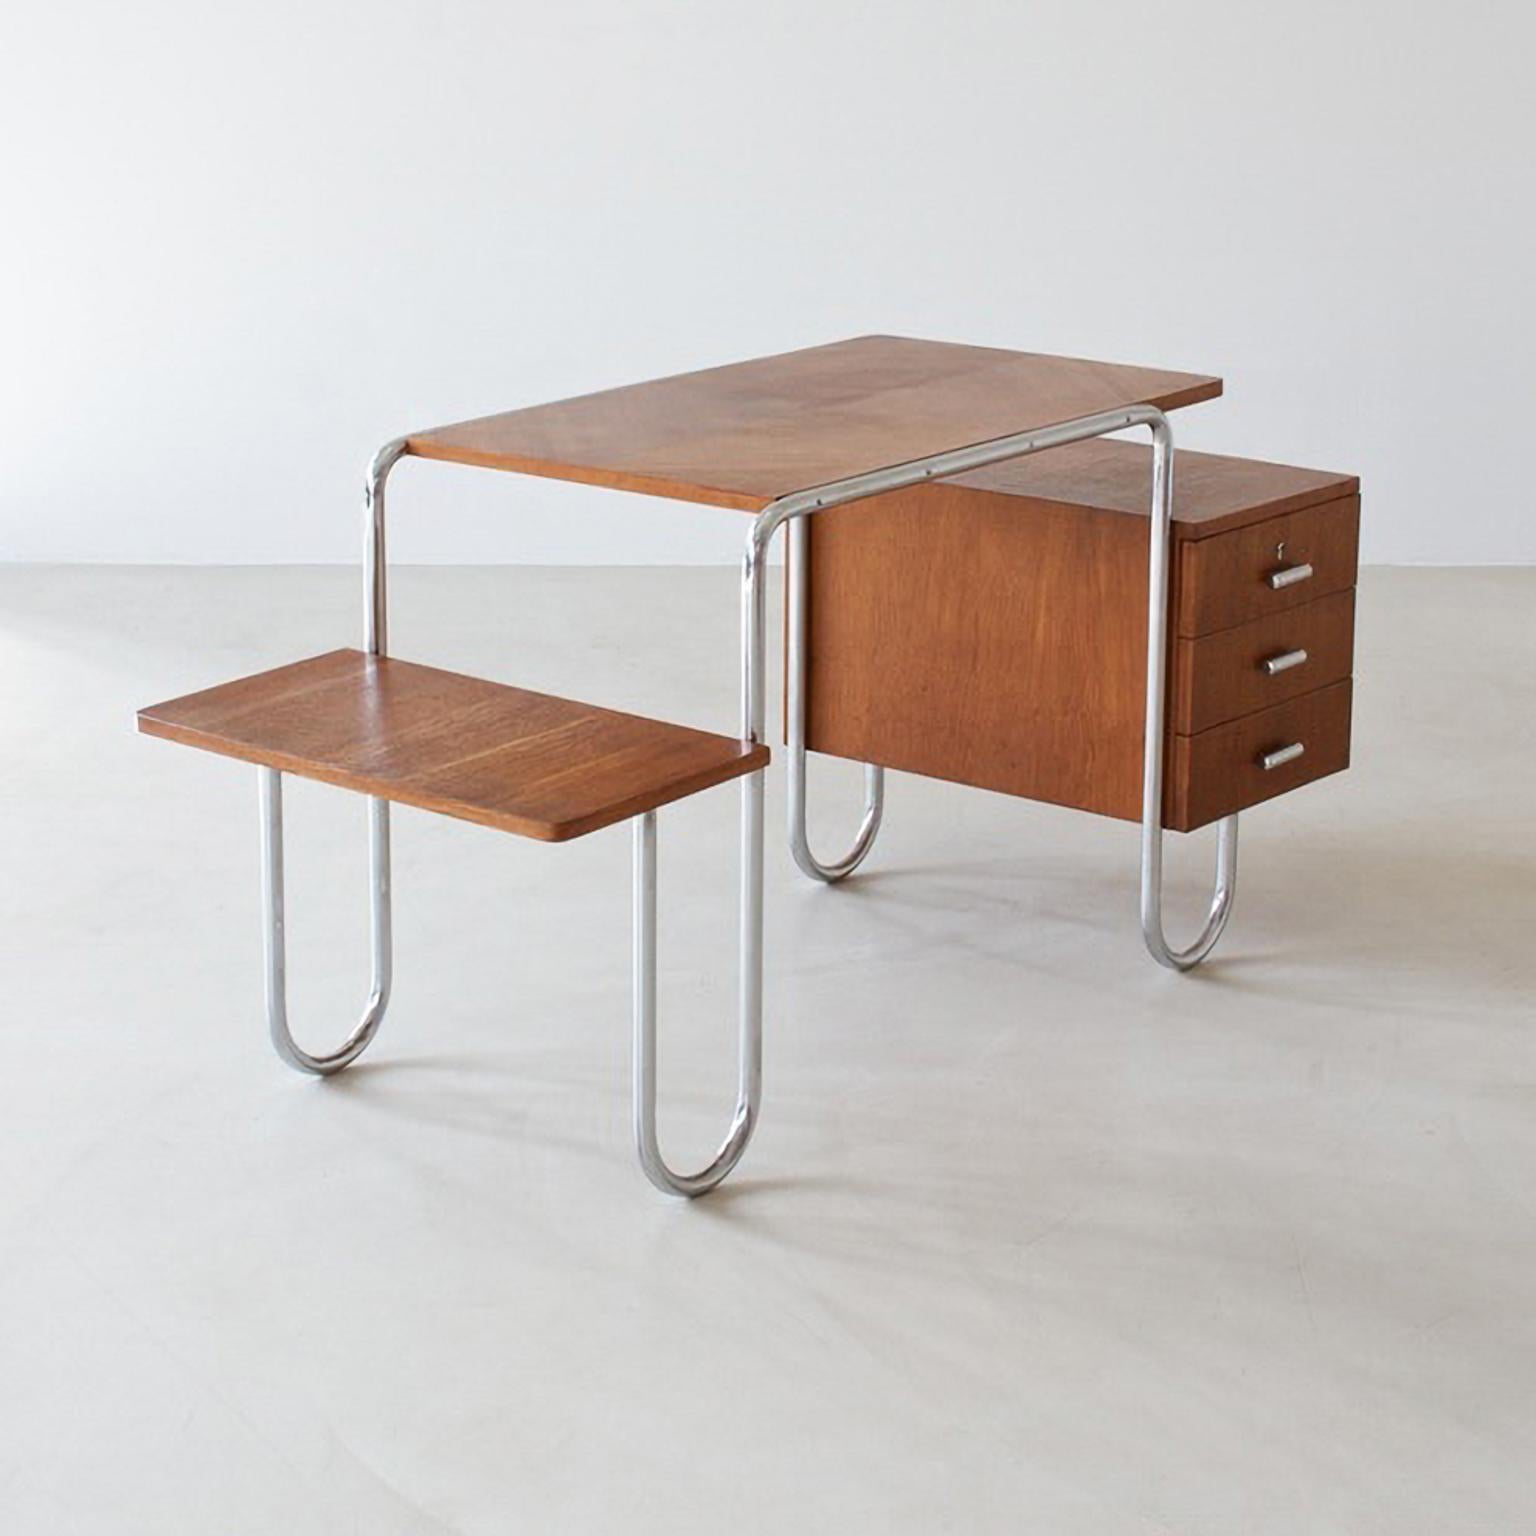 Bauhaus tubular steel desk designed by André Lurçat and probably manufactured by Thonet. Chrome plated tubular steel, stained oak veneer, circa 1930.